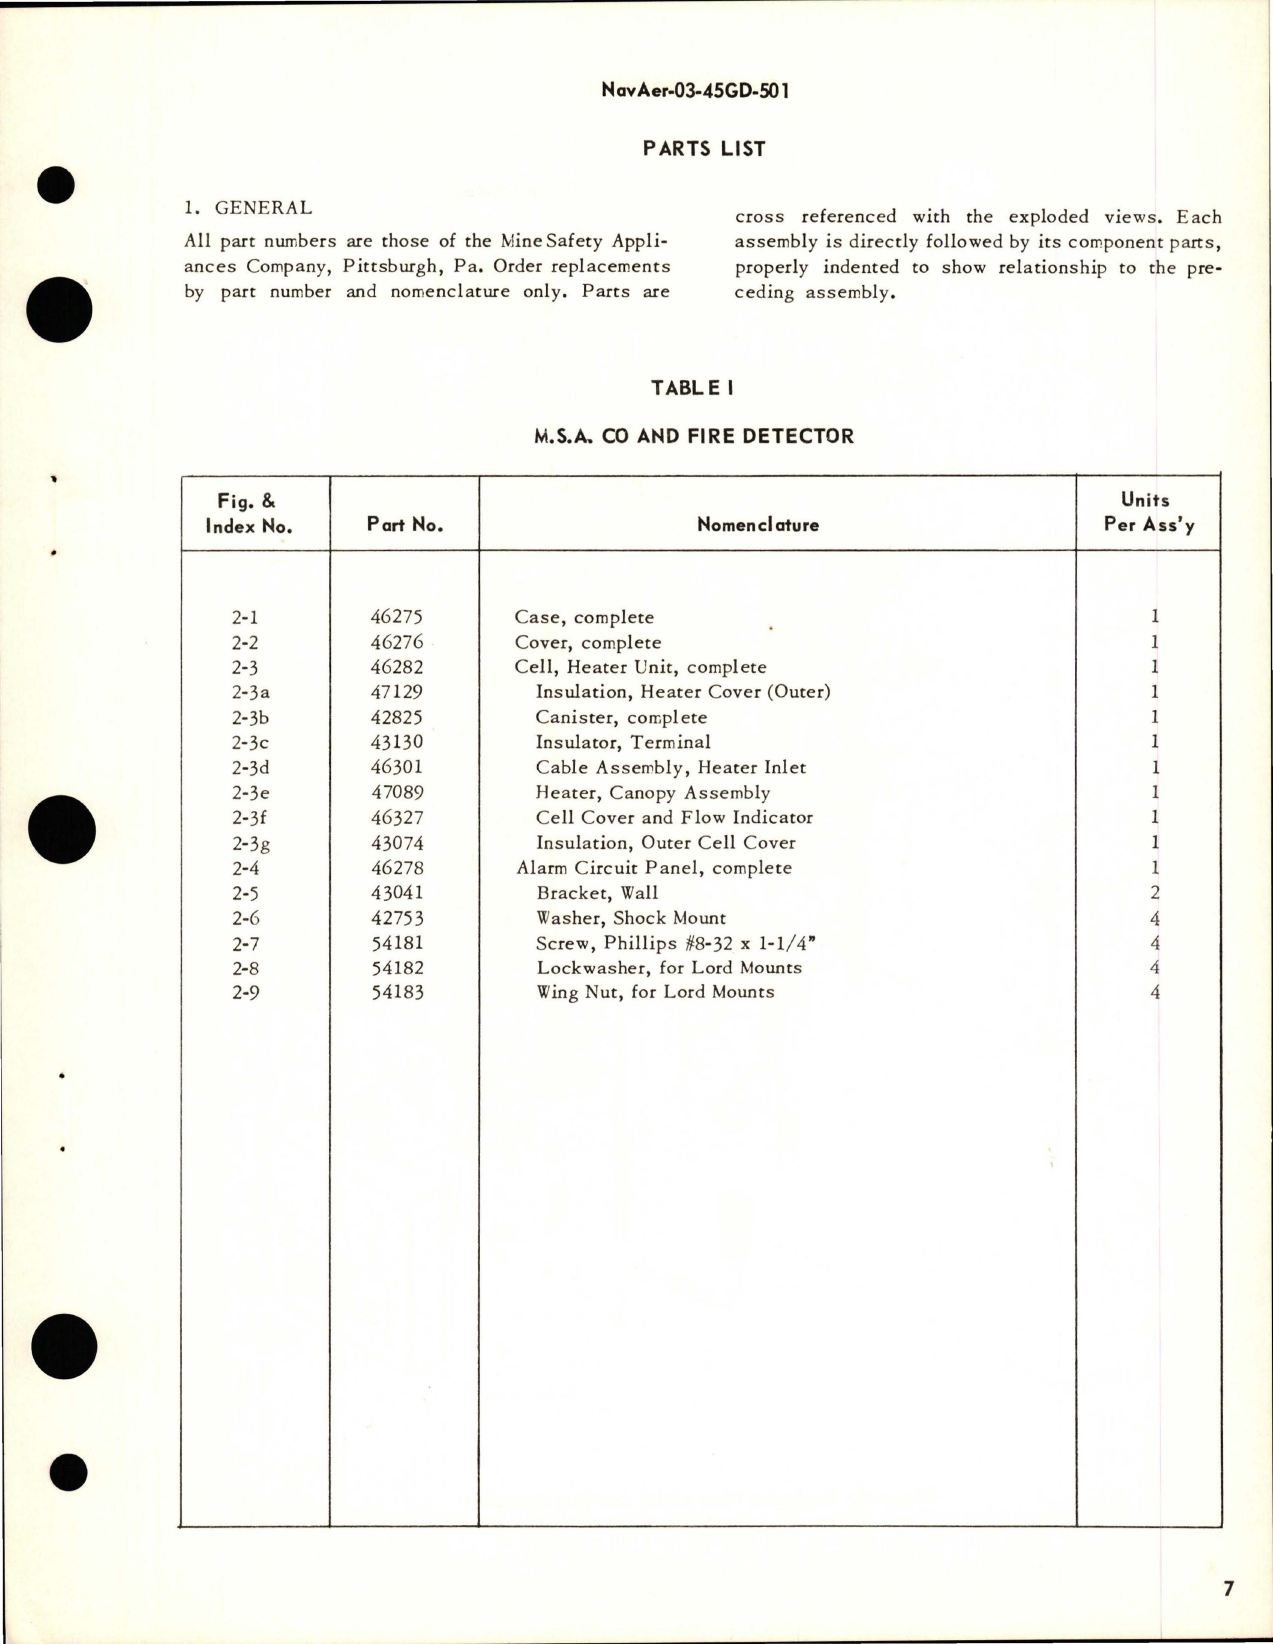 Sample page 7 from AirCorps Library document: Overhaul Instructions with Parts Breakdown for CO & Fire Detector - DR-45878